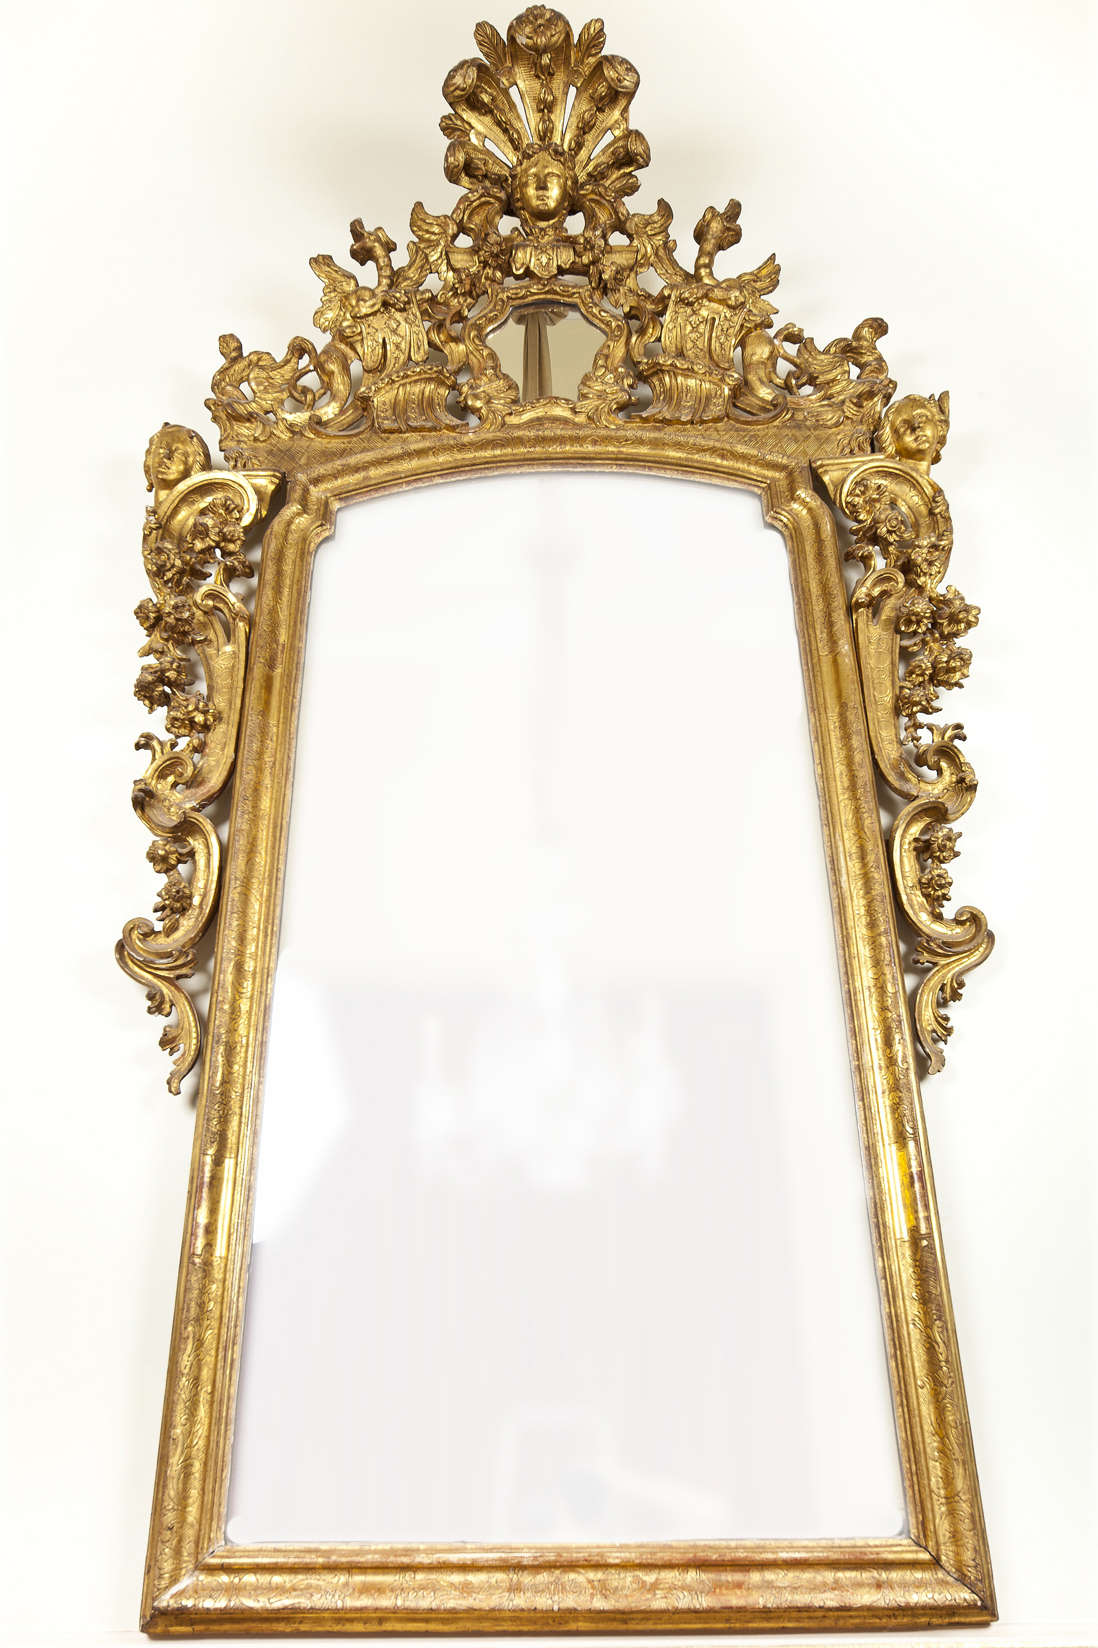 Filippo Juvarra, Mirror (1735-1736; carved and gilded wood, glass, 245 x 133 cm; Madrid, Gallery of the Royal Collections)